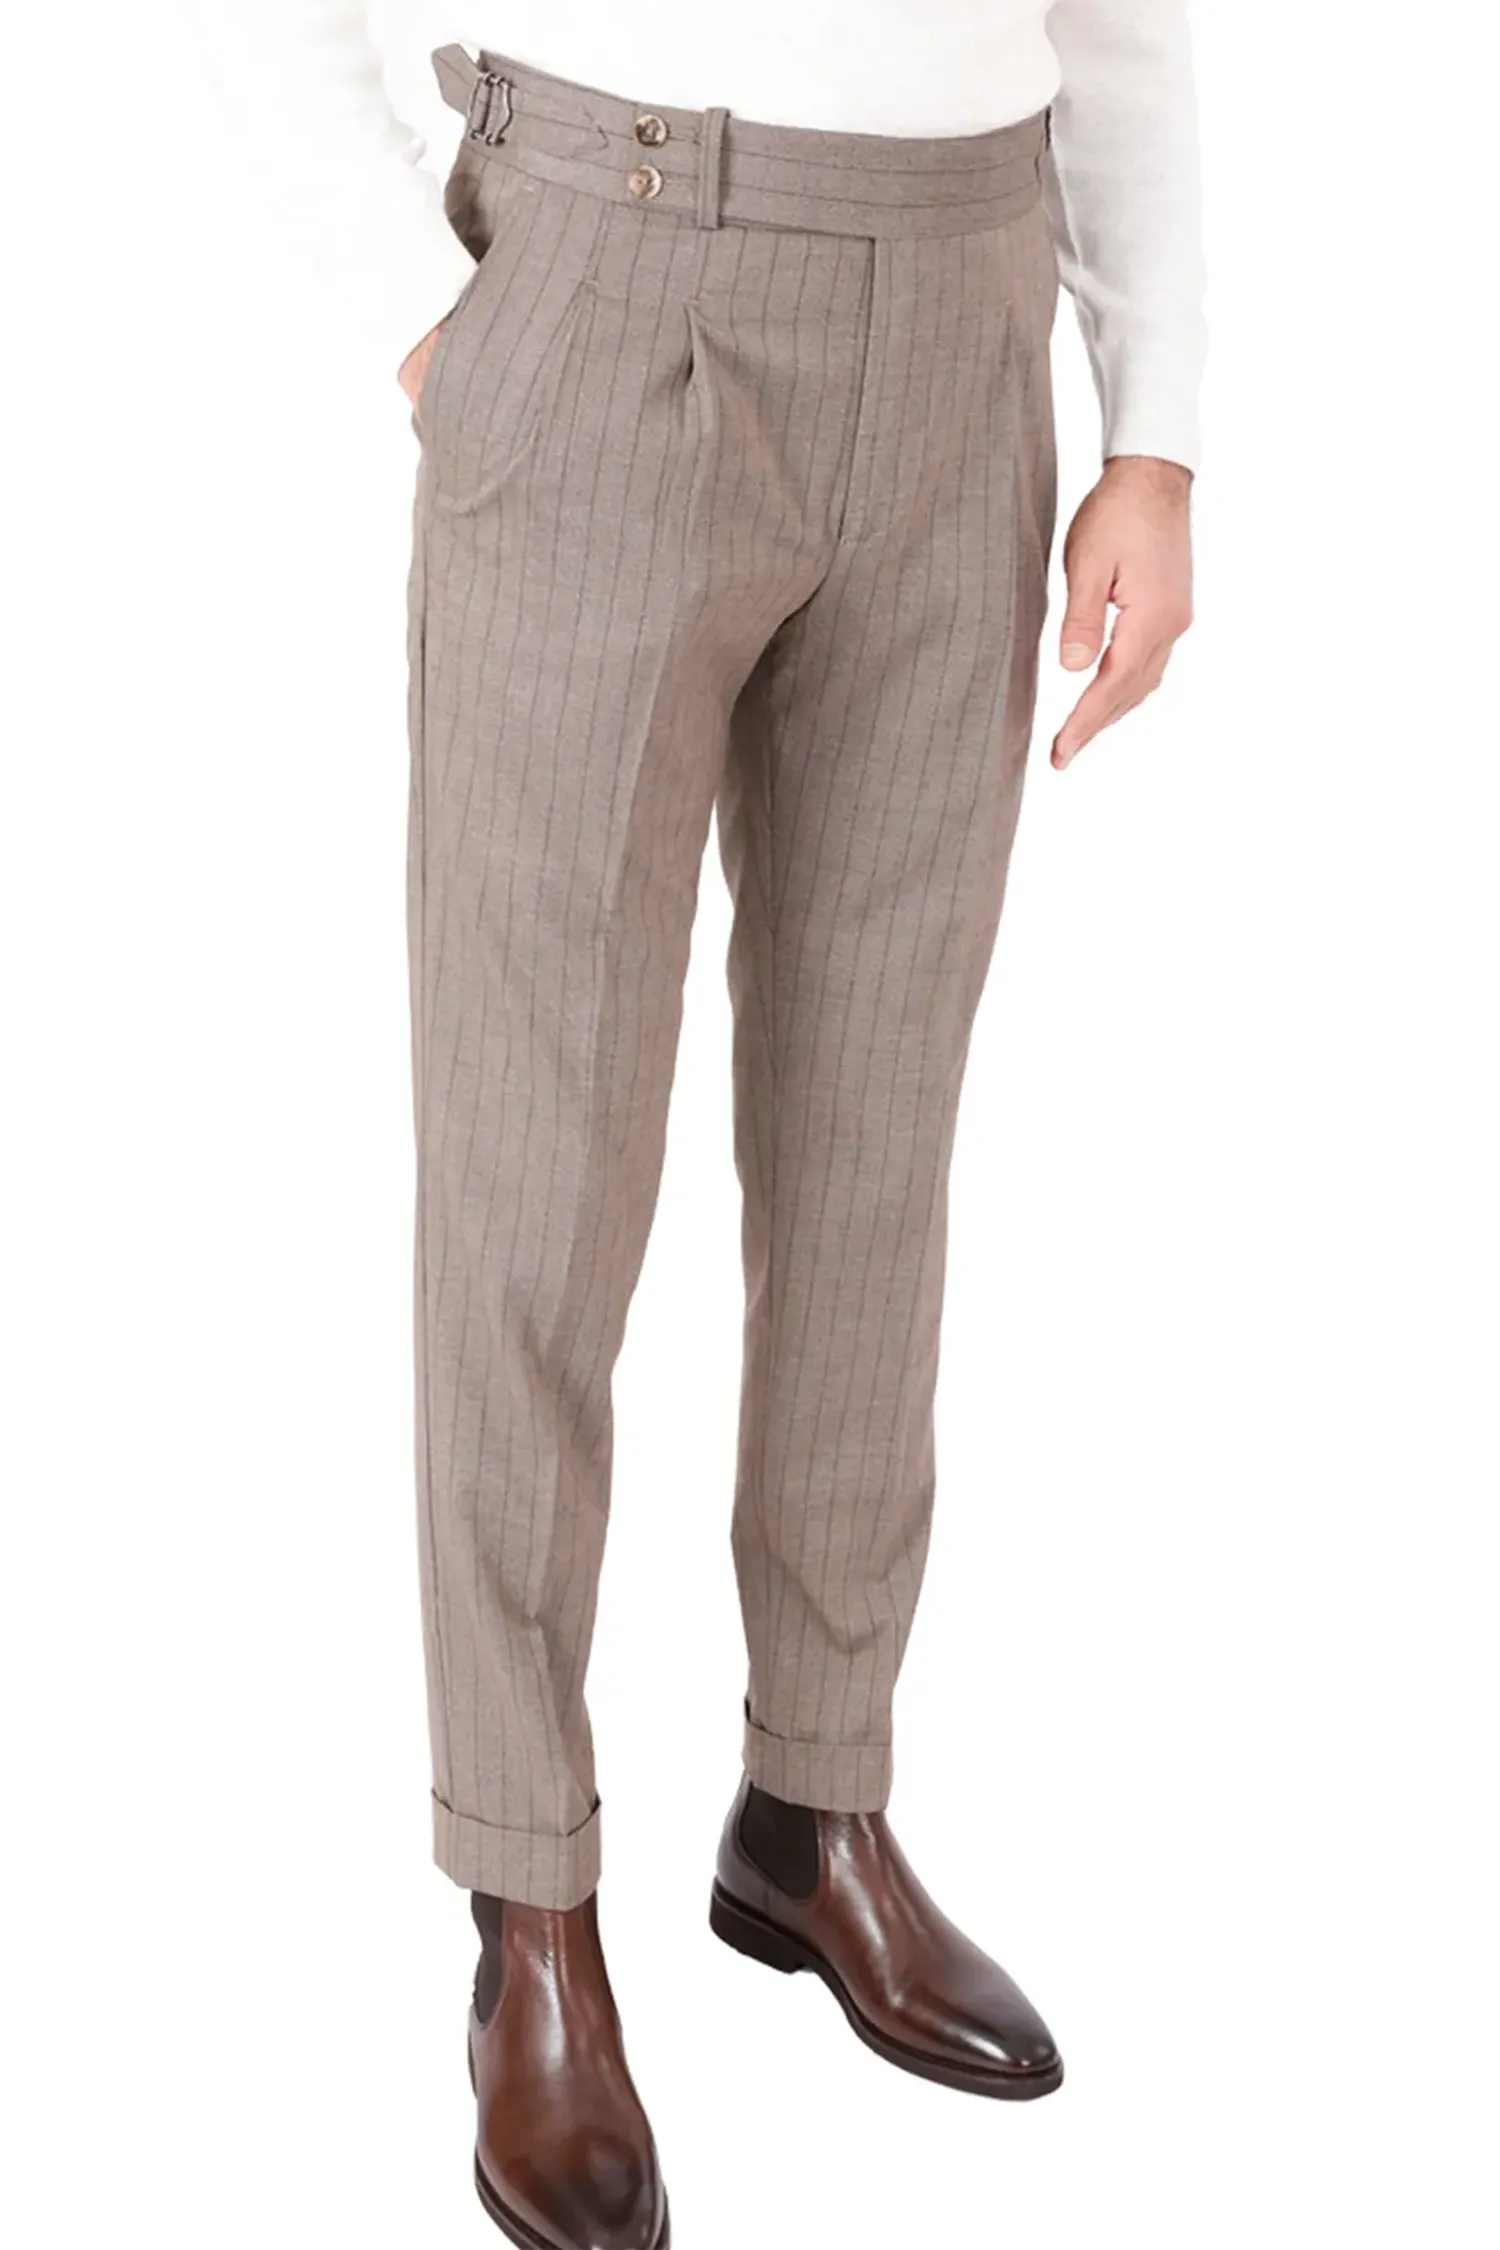 Quincy tan pinstripe trousers